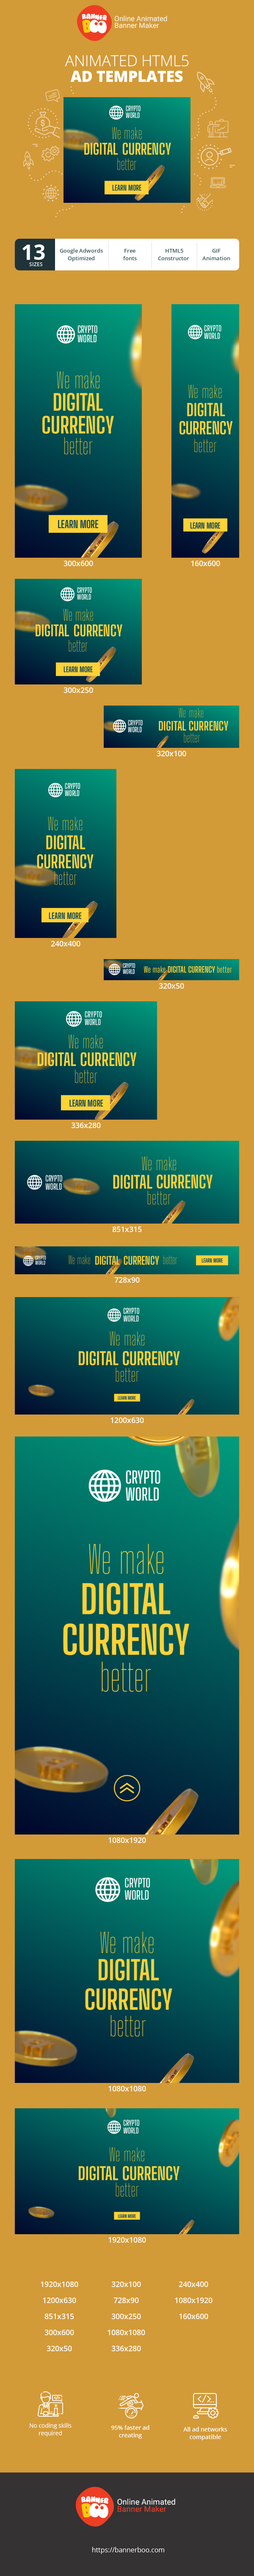 Banner ad template — We Make Digital Currency Better — Cryptocurrency